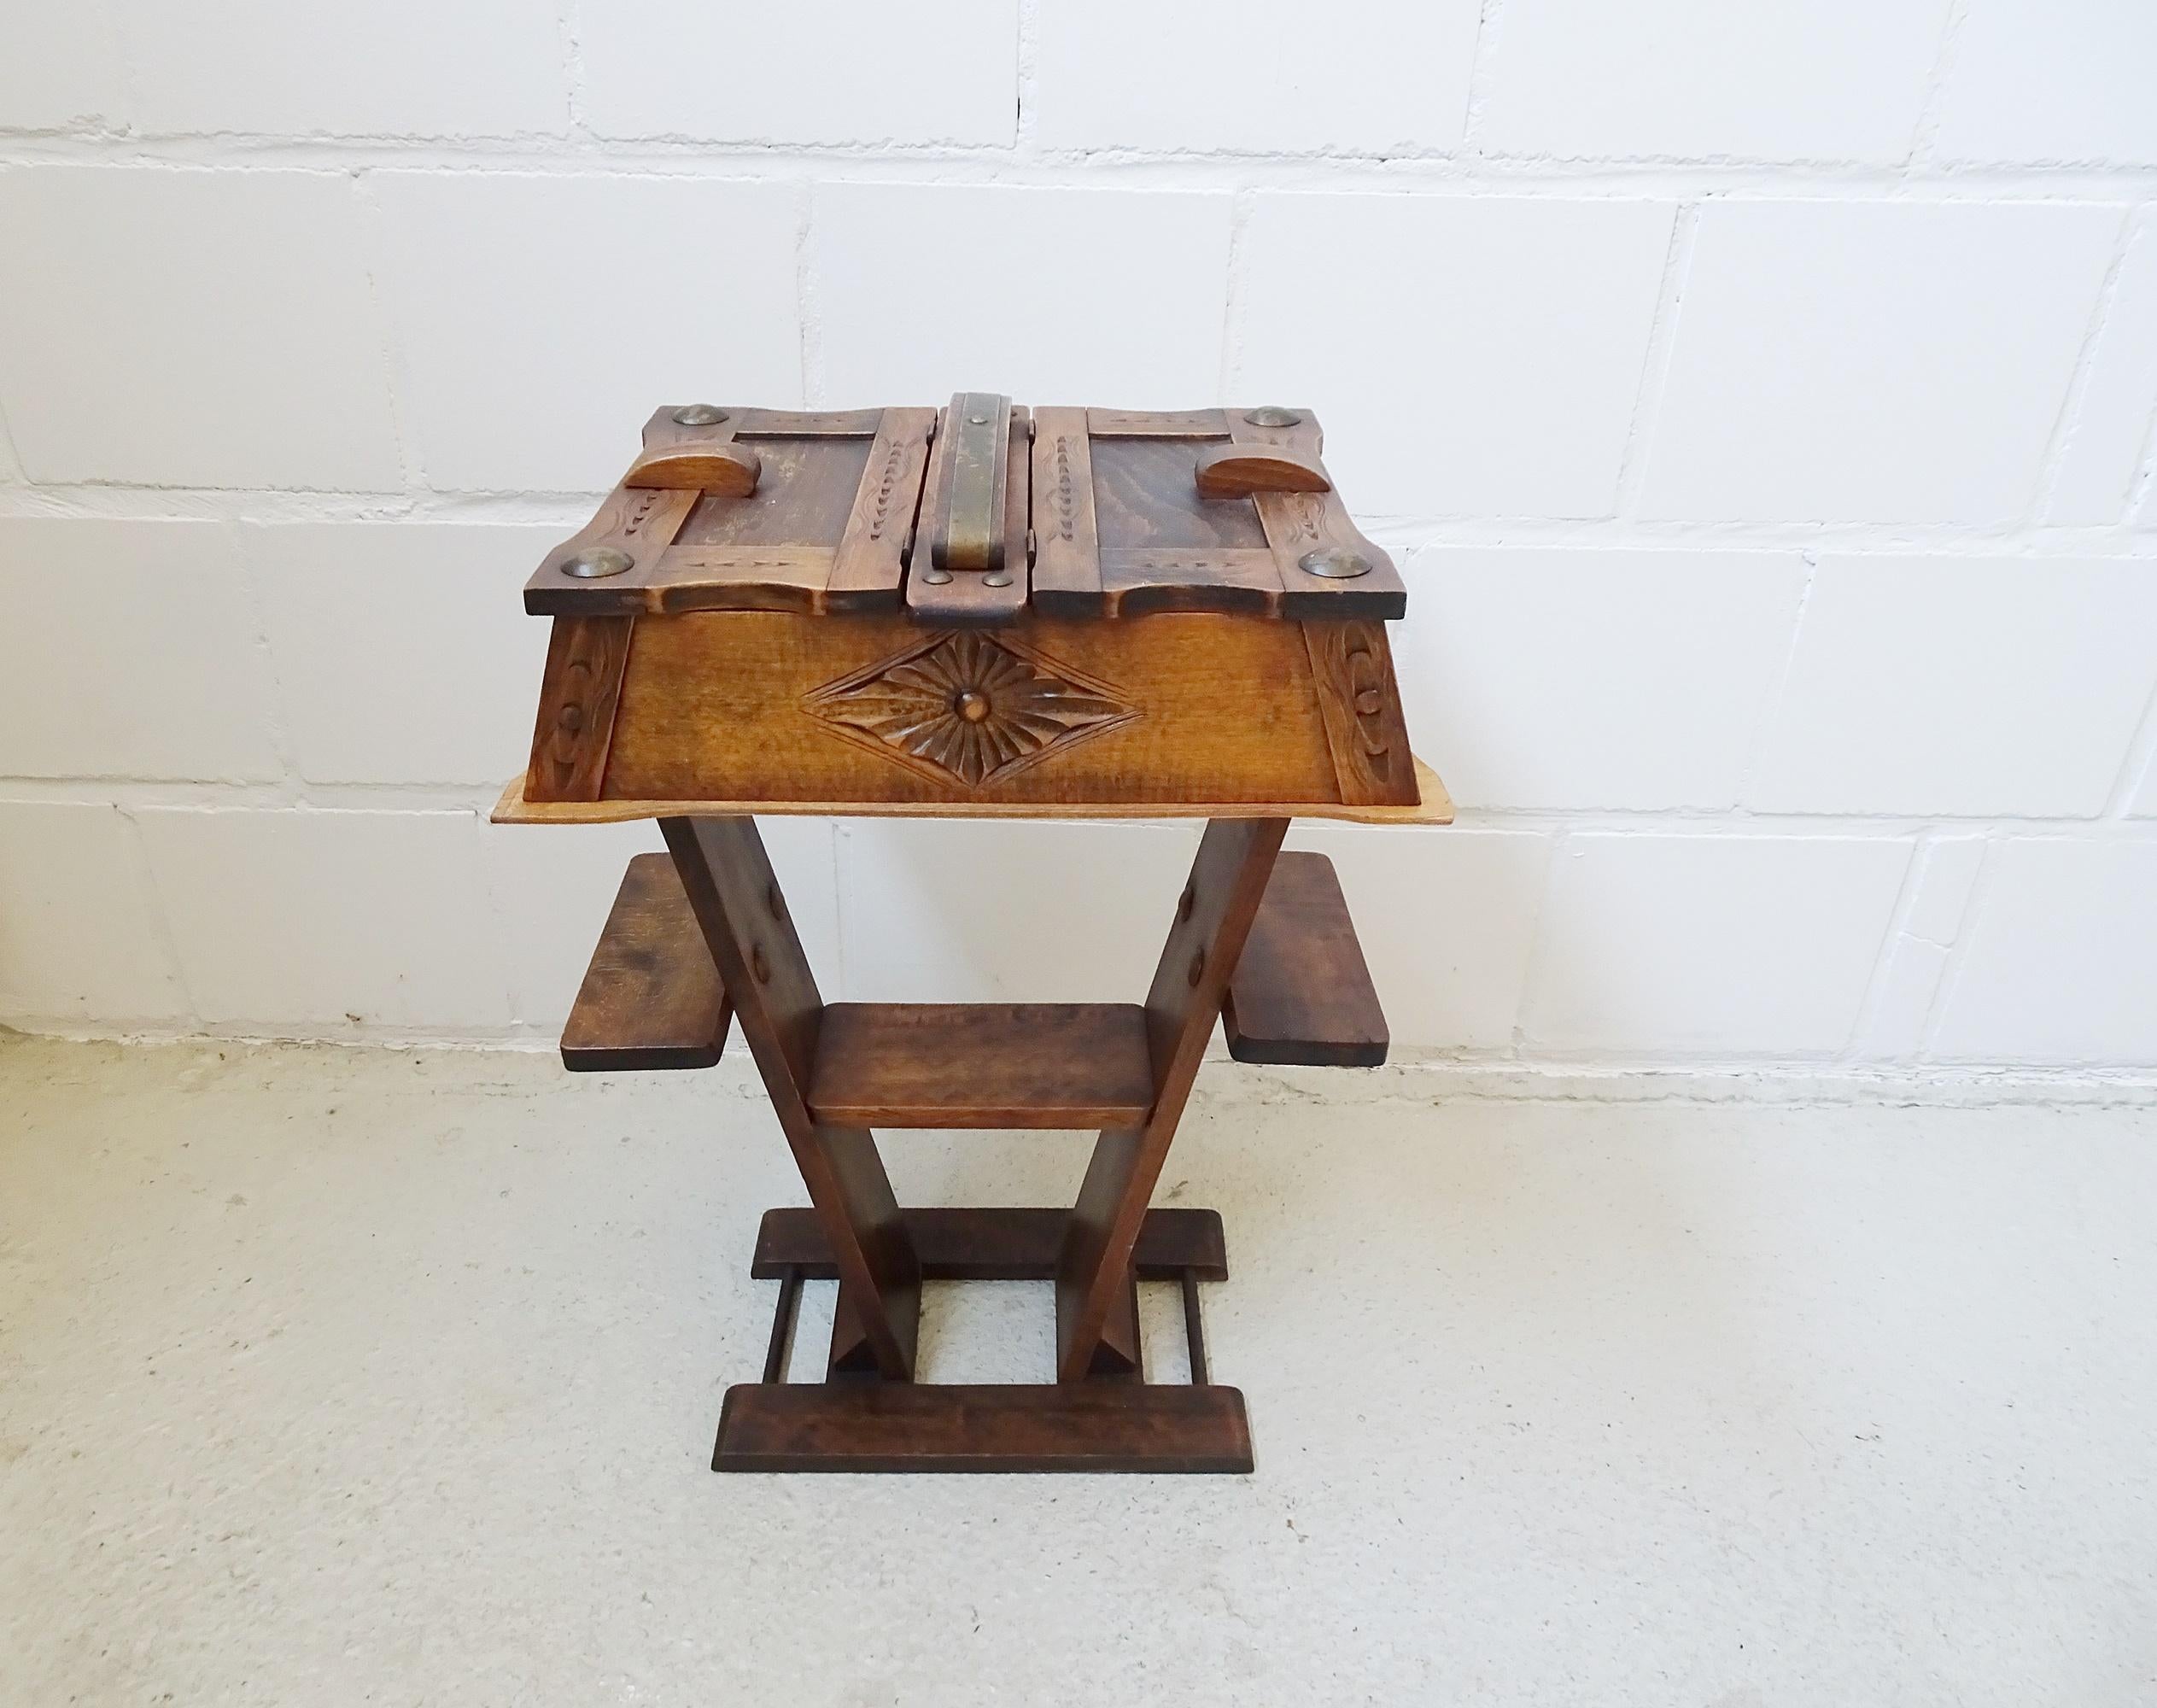 This French work table is an exceptional Art Deco style sewing table from the early 1960s. Brutalist design with carved details and large round metal bezels. The sewing box has a spacious room with two folding openings and three additional storage